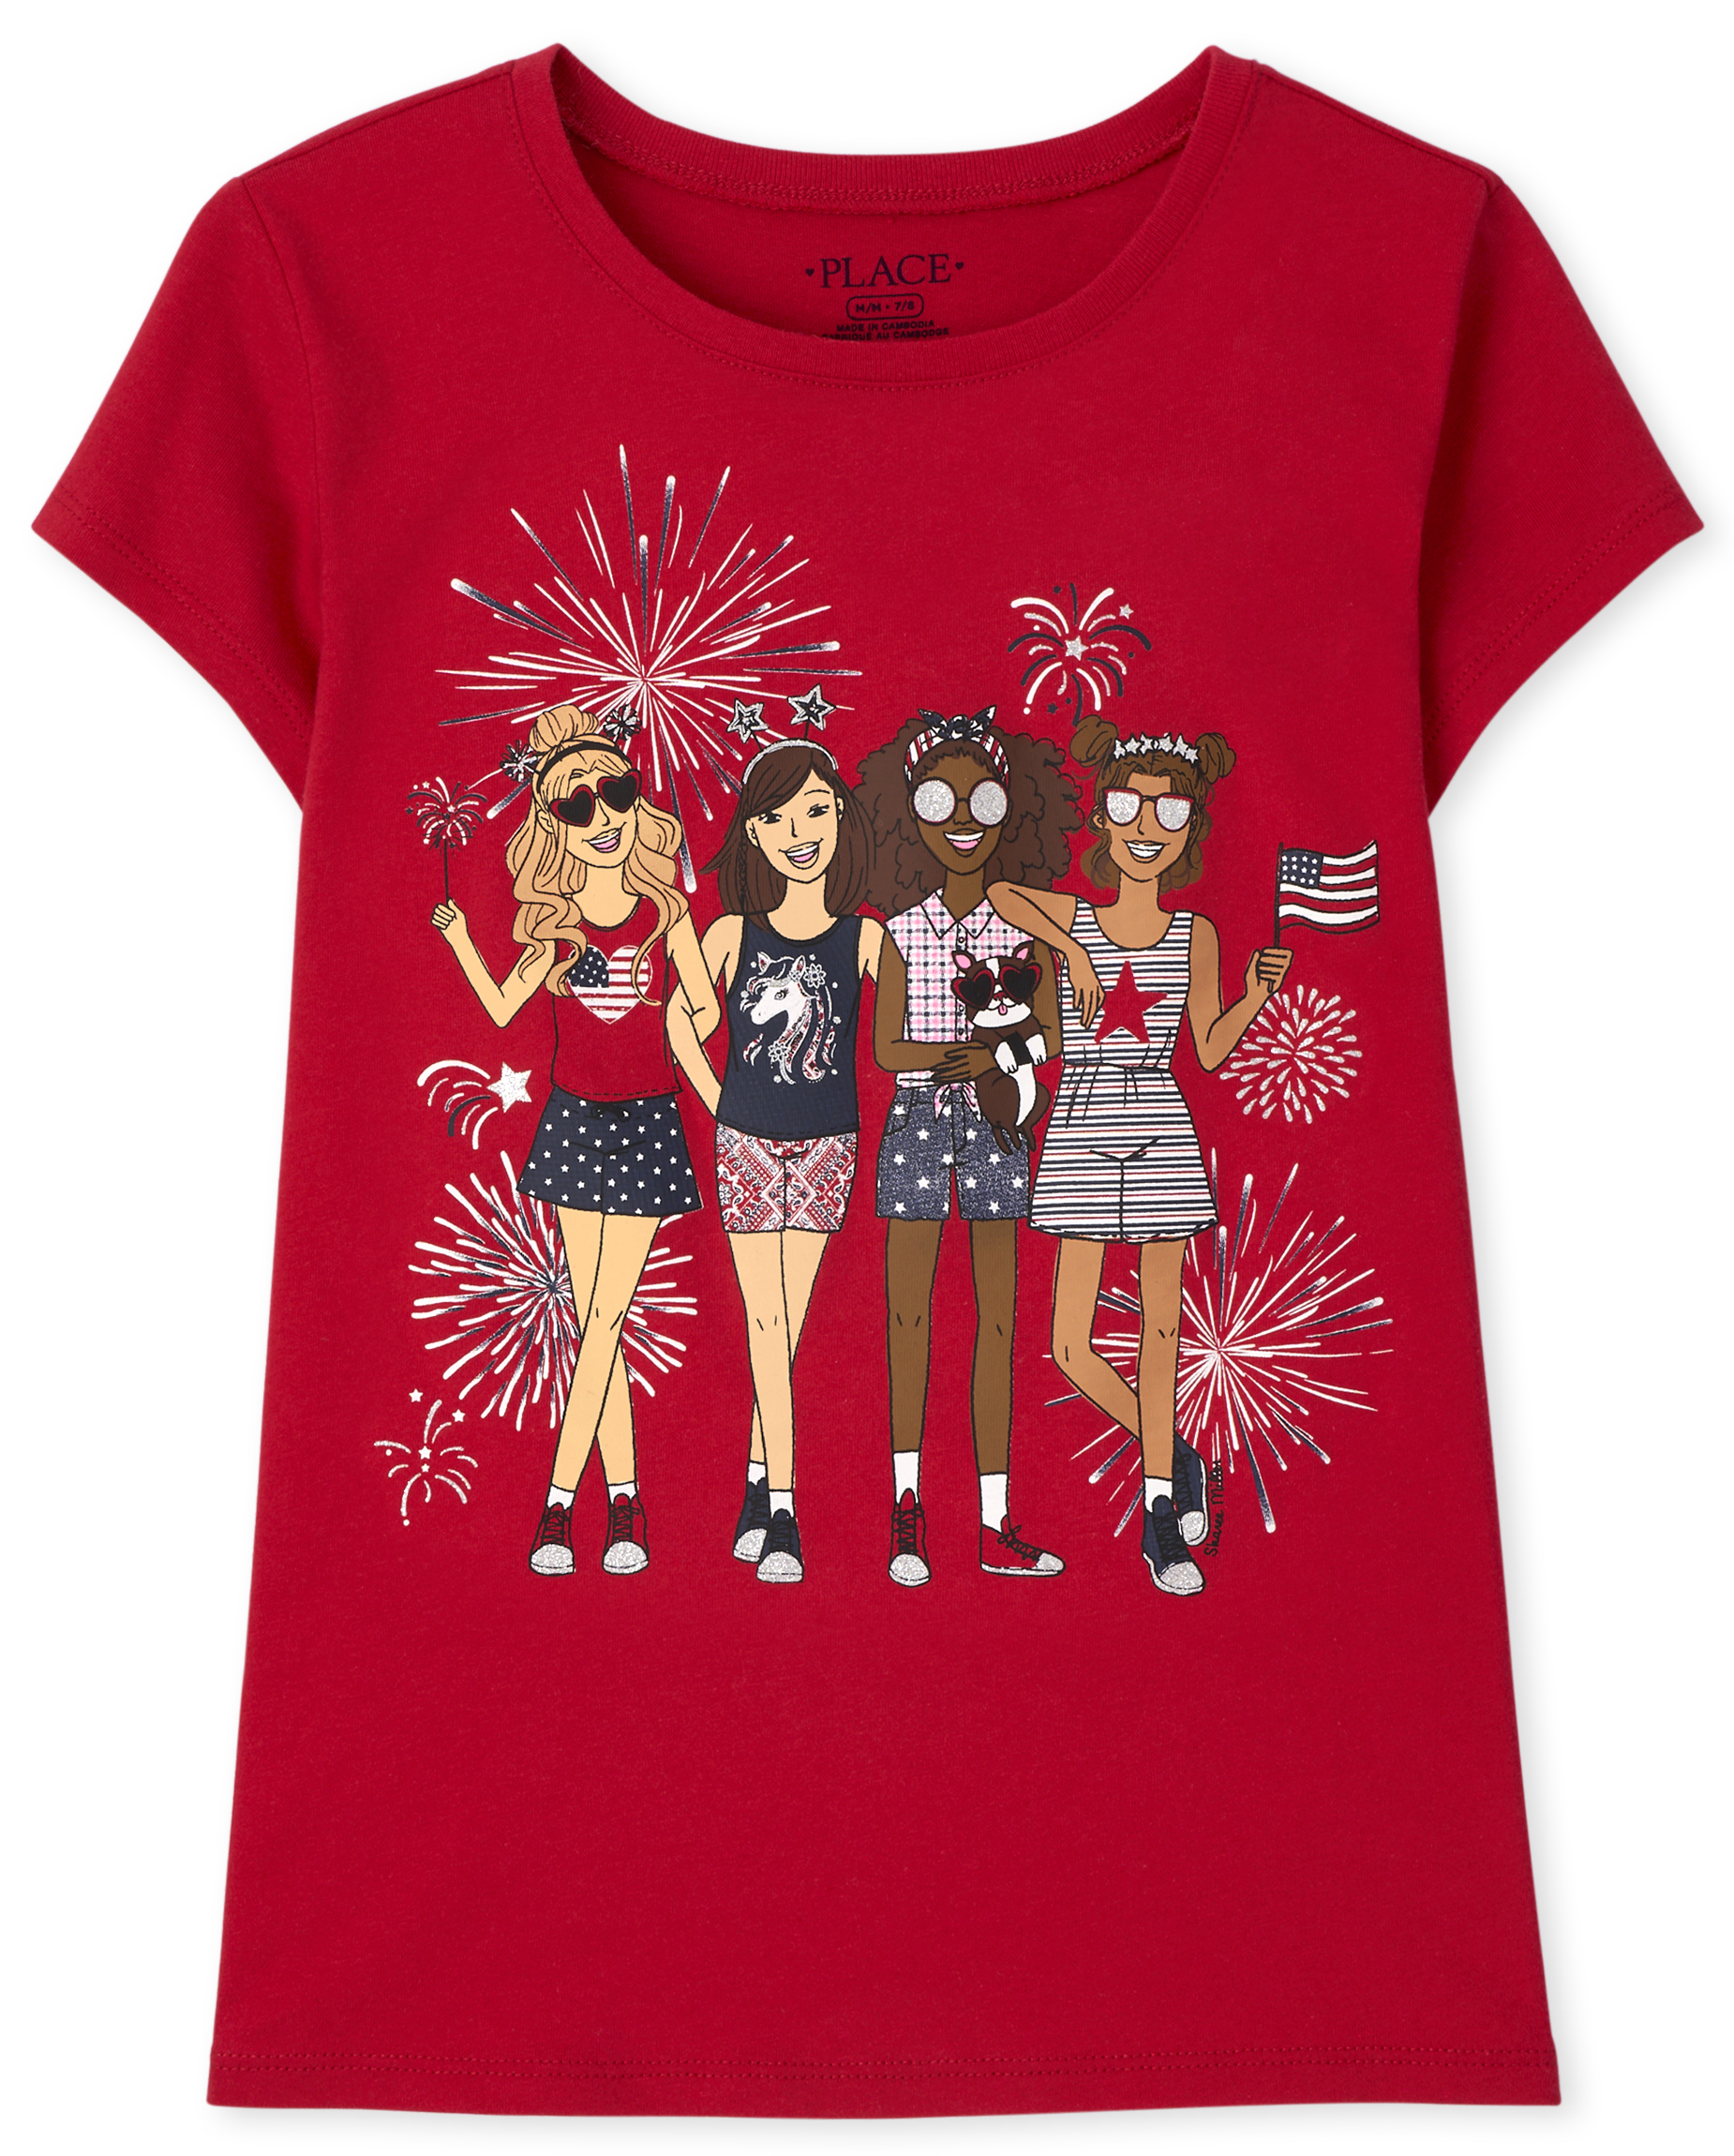 The Childrens Place Girls Big Graphic Fashion Tops